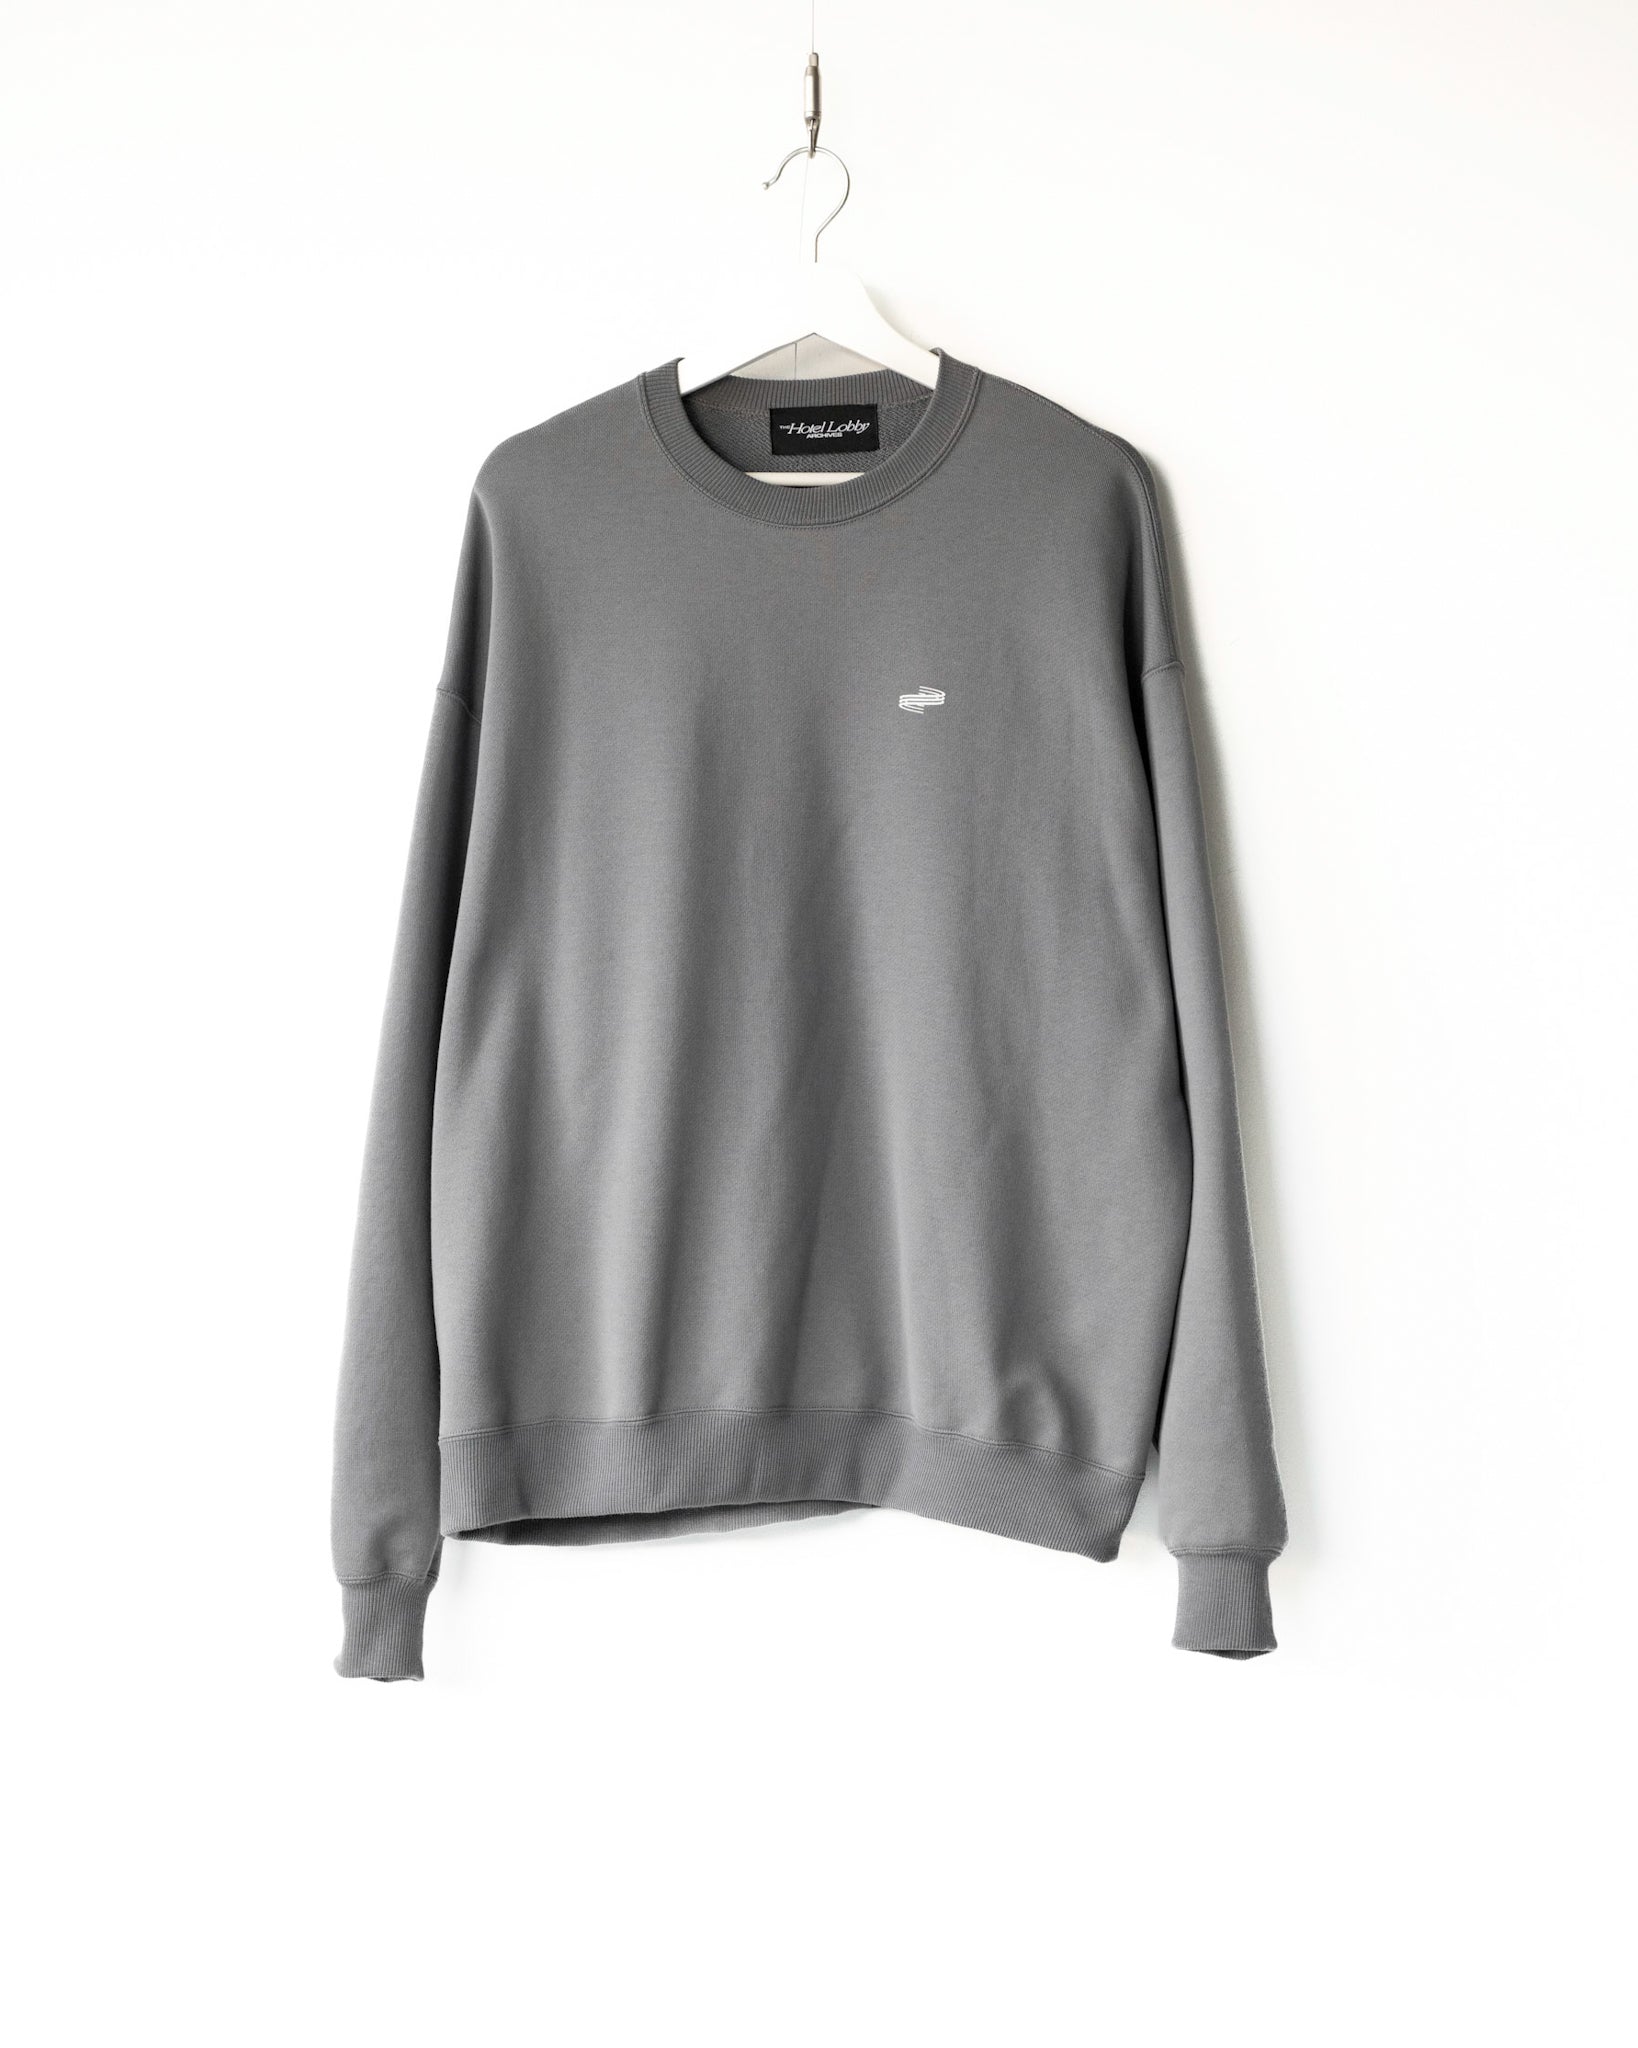 【THE HOTEL LOBBY ARCHIVES】PAN EXCLUSIVE "THANKS BRUCE" SWEAT SHIRT